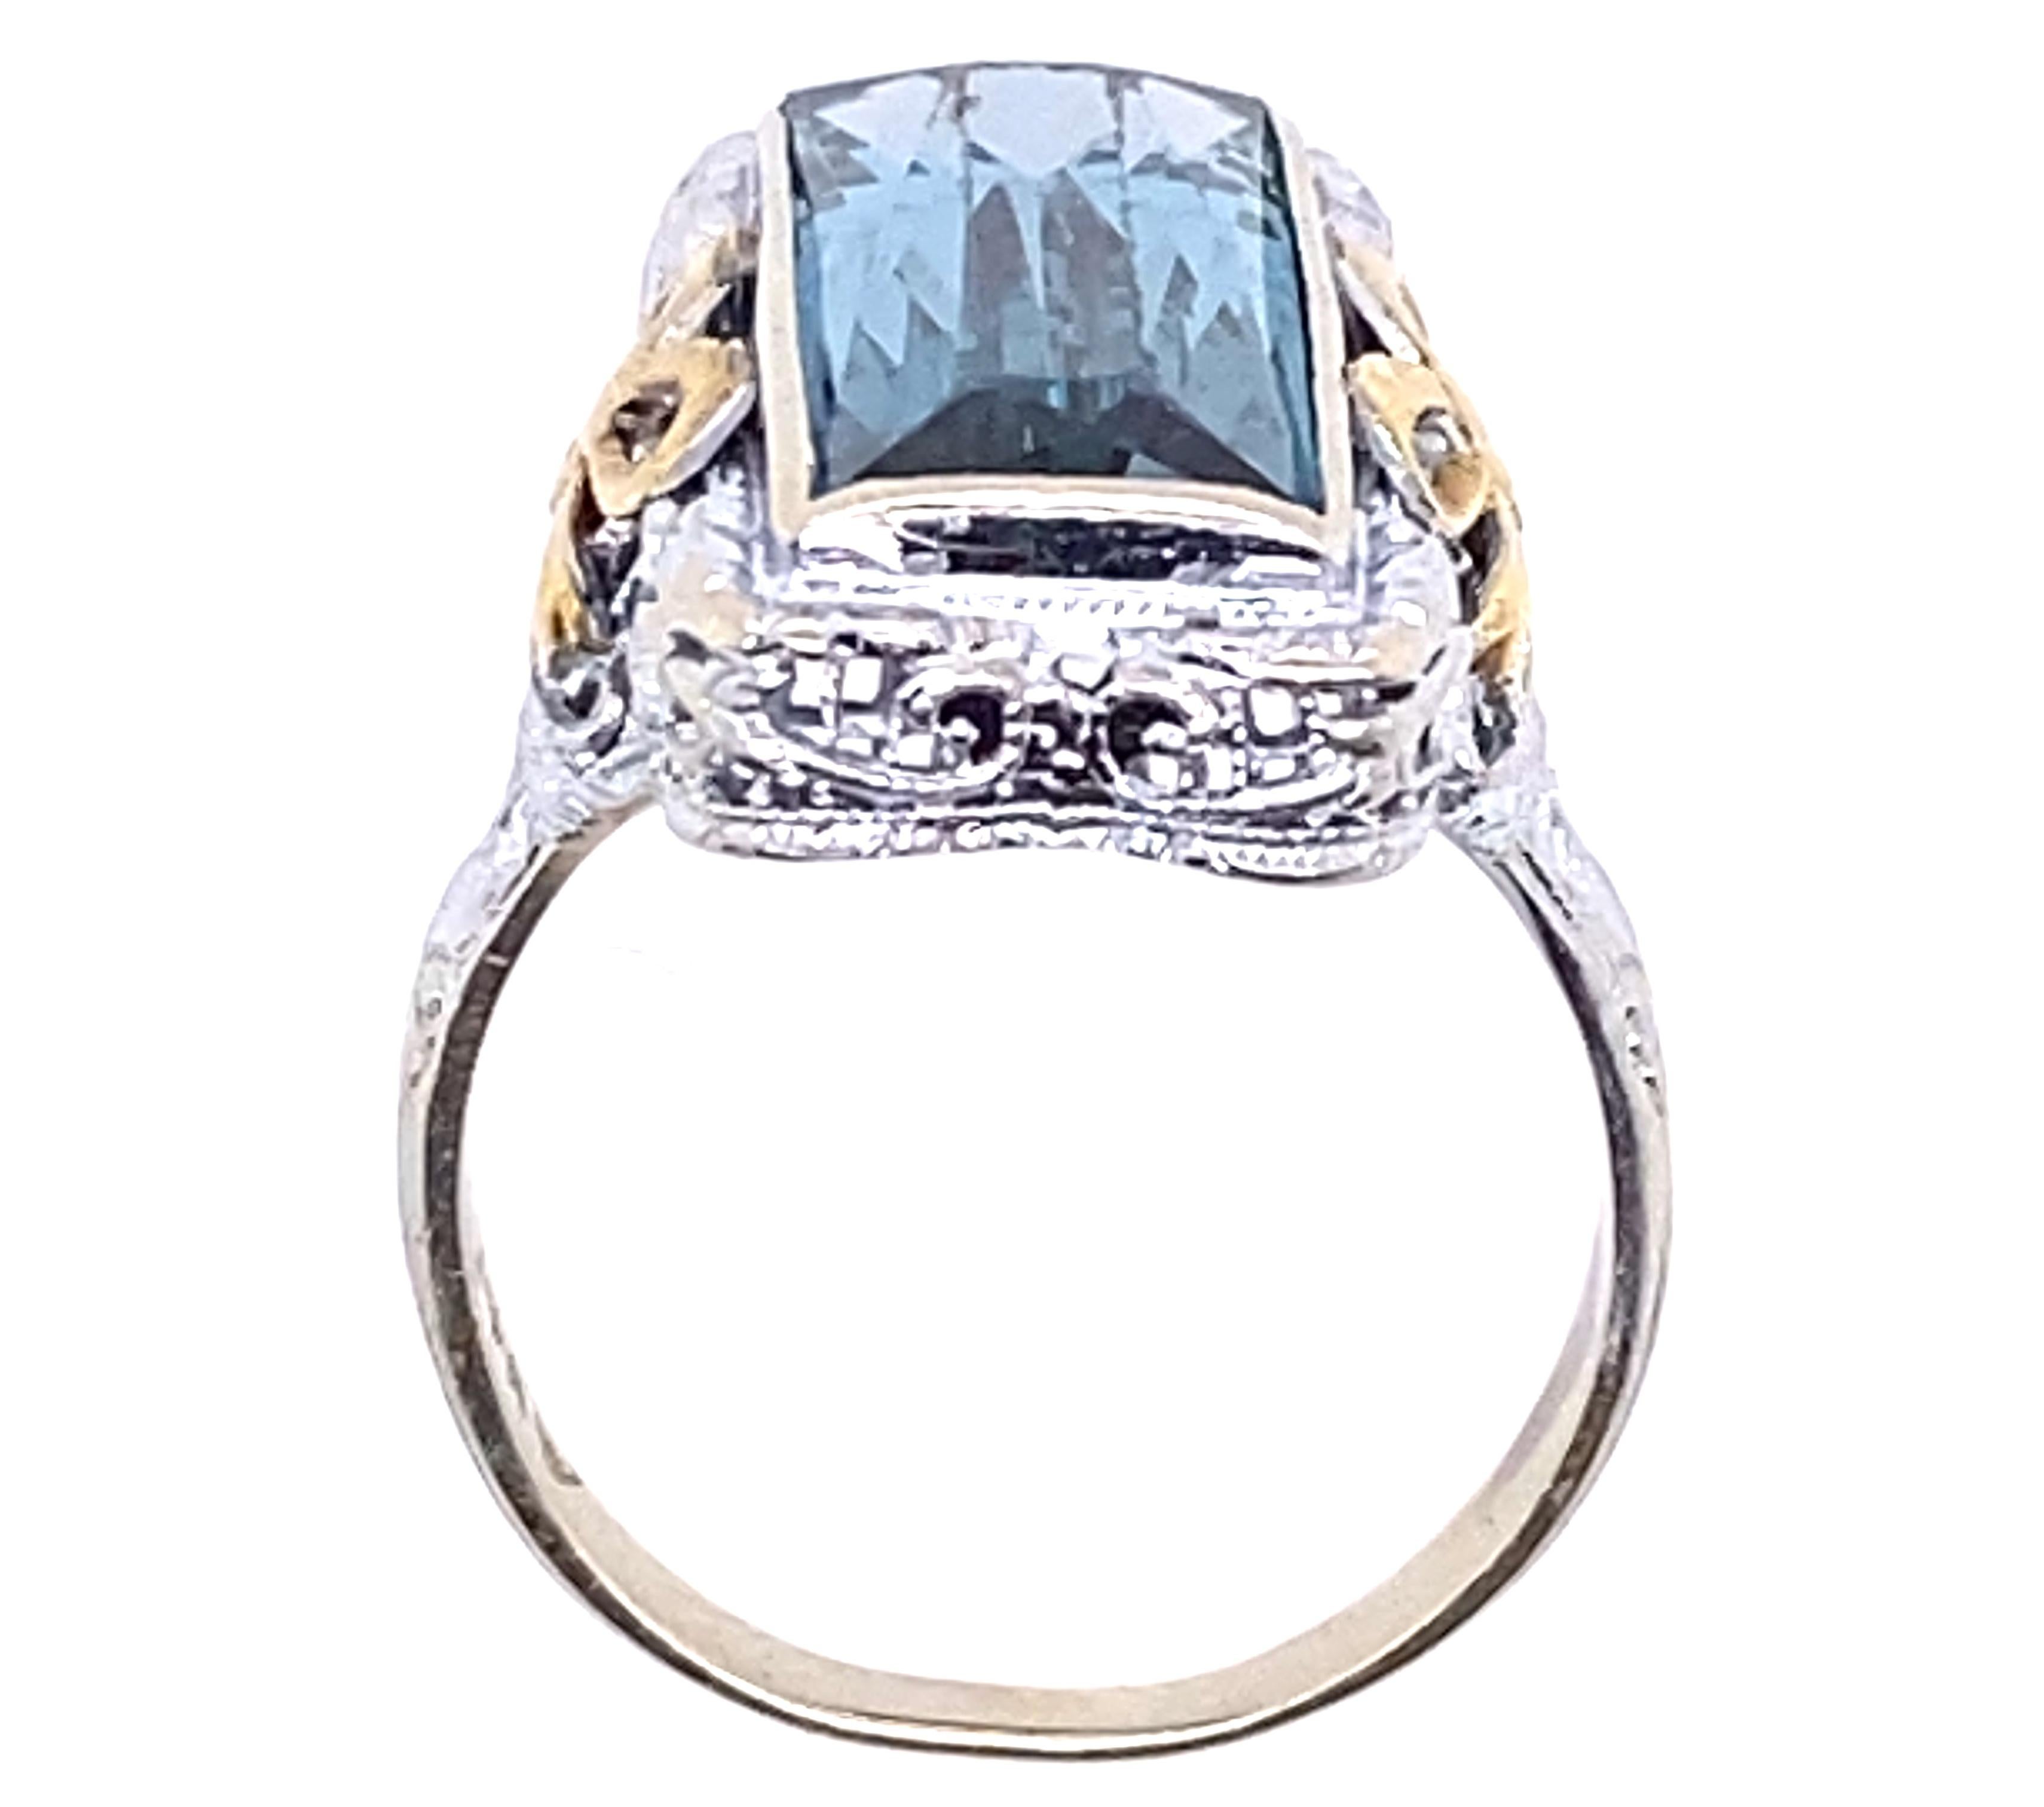 Vintage Antique 6ct Blue Topaz 14K White Gold Art Deco Cocktail Ring


Featuring a 6.00ct Natural Emerald Cut Blue Topaz Gemstone Center

Topaz Was Custom Cut For This Ring

Yellow Gold Bows on the Sides

Stunning Filigree

Absolutely